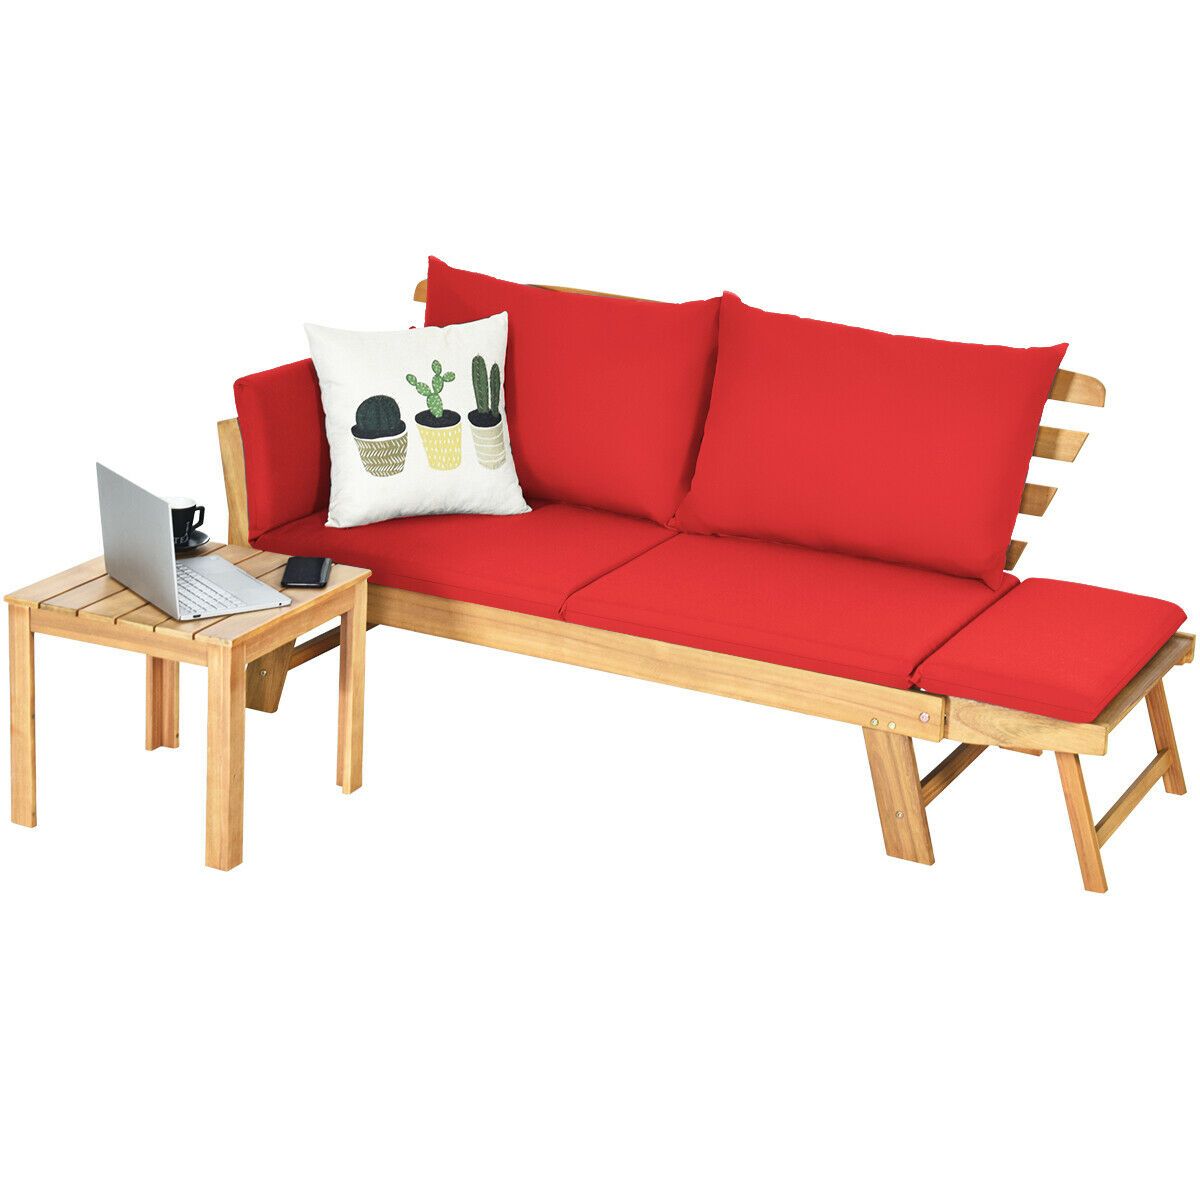 3 in 1 Convertible Cushioned Loveseat Lounger Couch with Pillows - Red